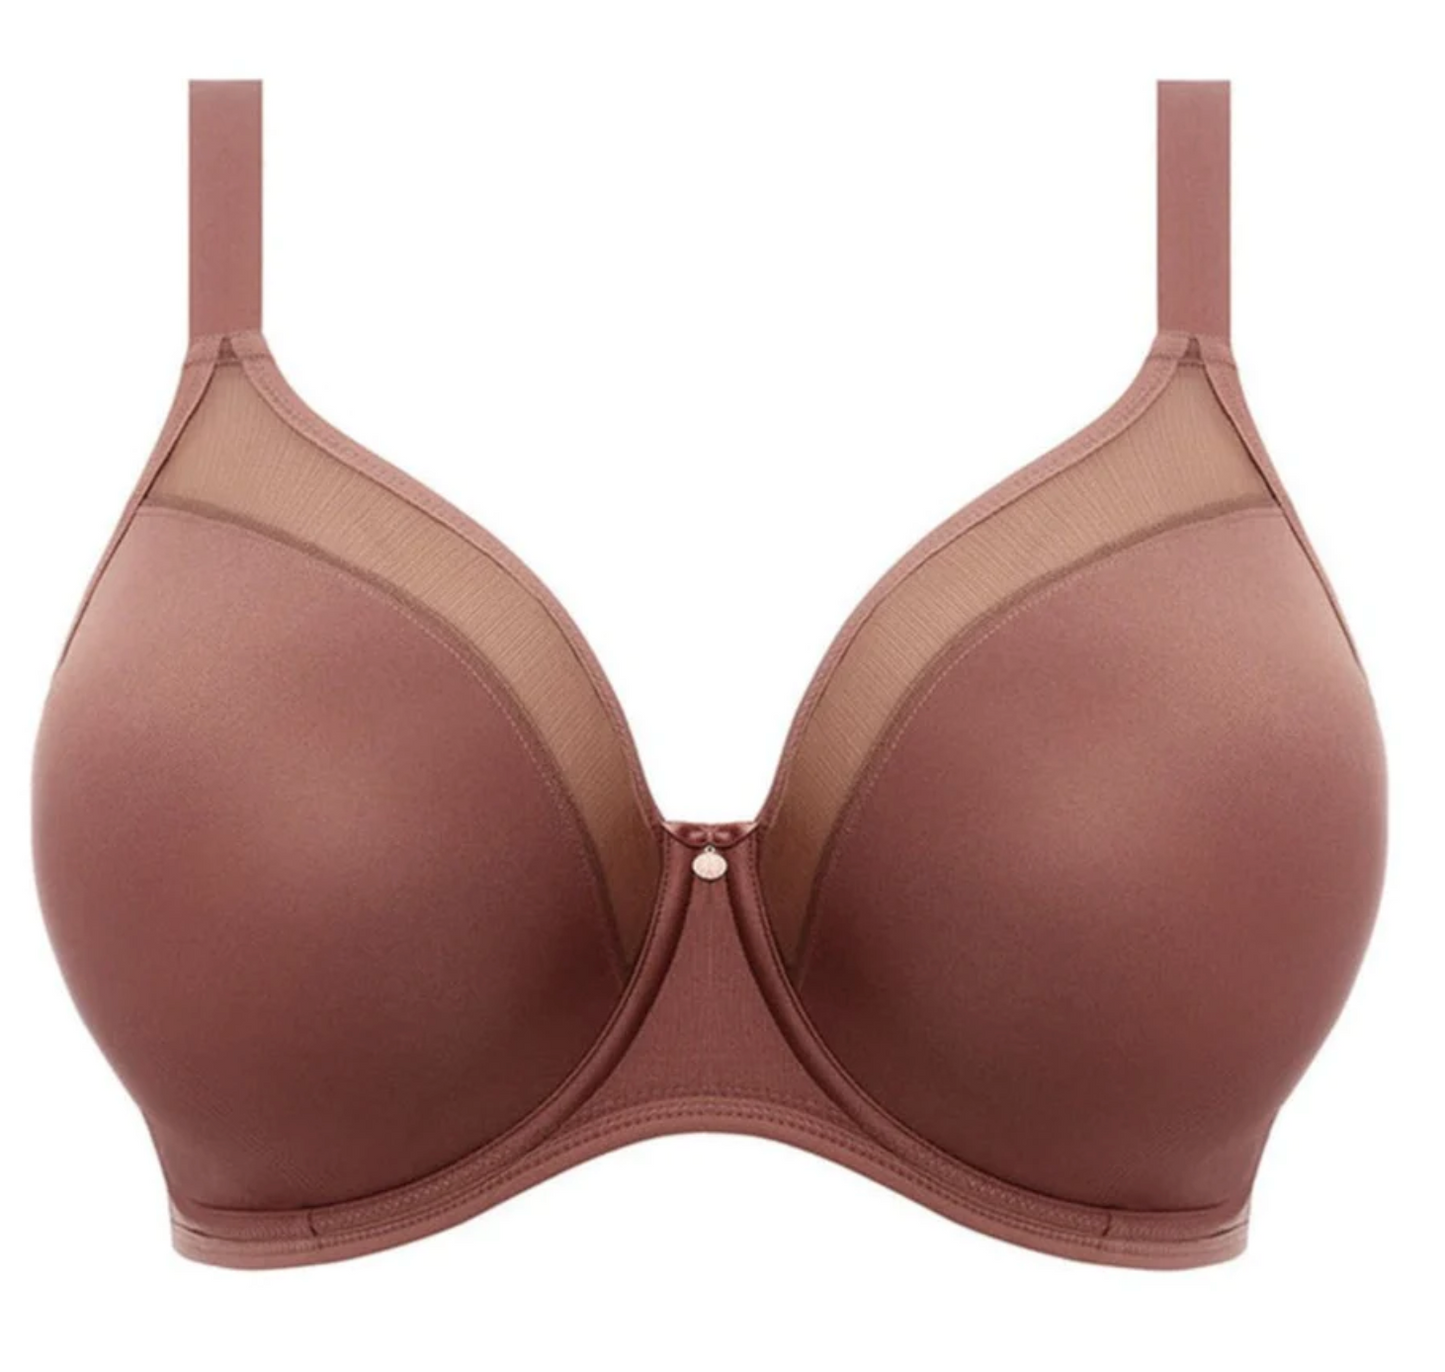 A Smooth Sensation, New And Exclusive To Bras N Things 